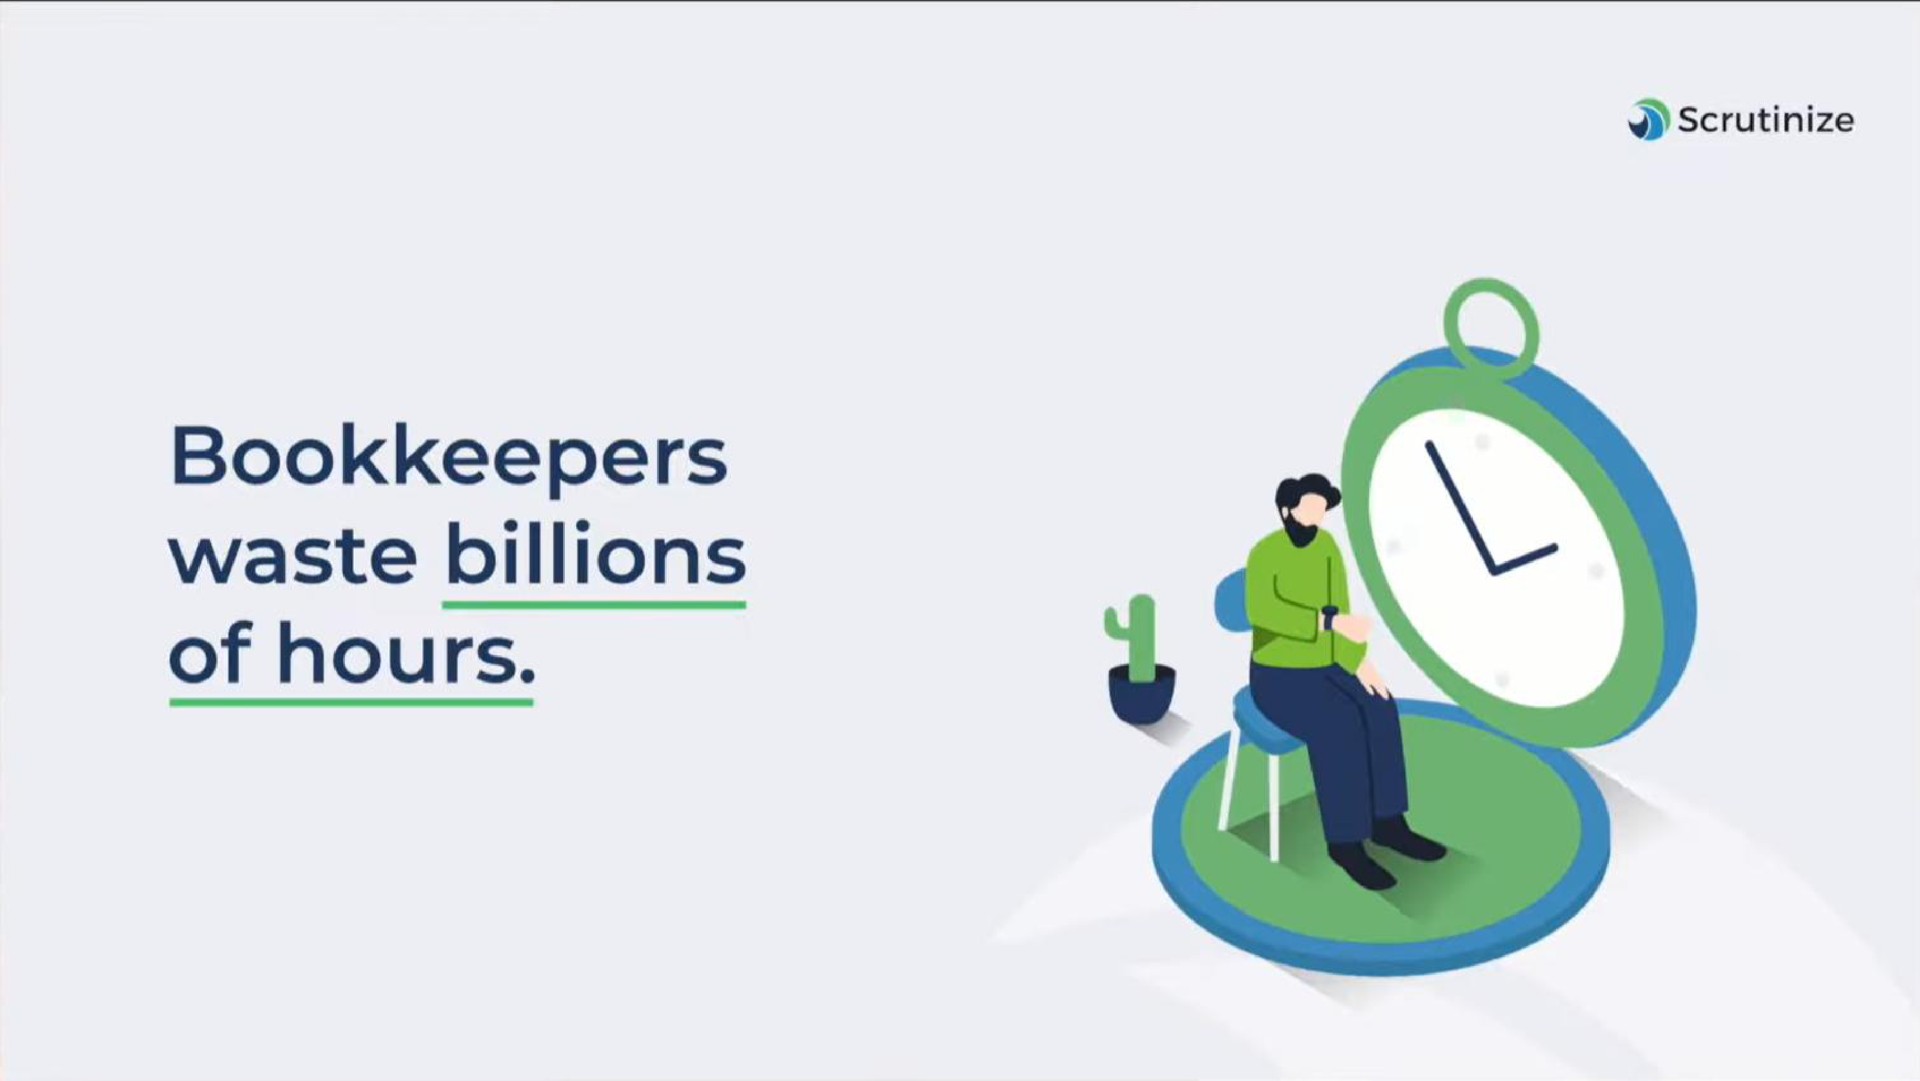 bookkeepers waste billions of hours | Scrutinize